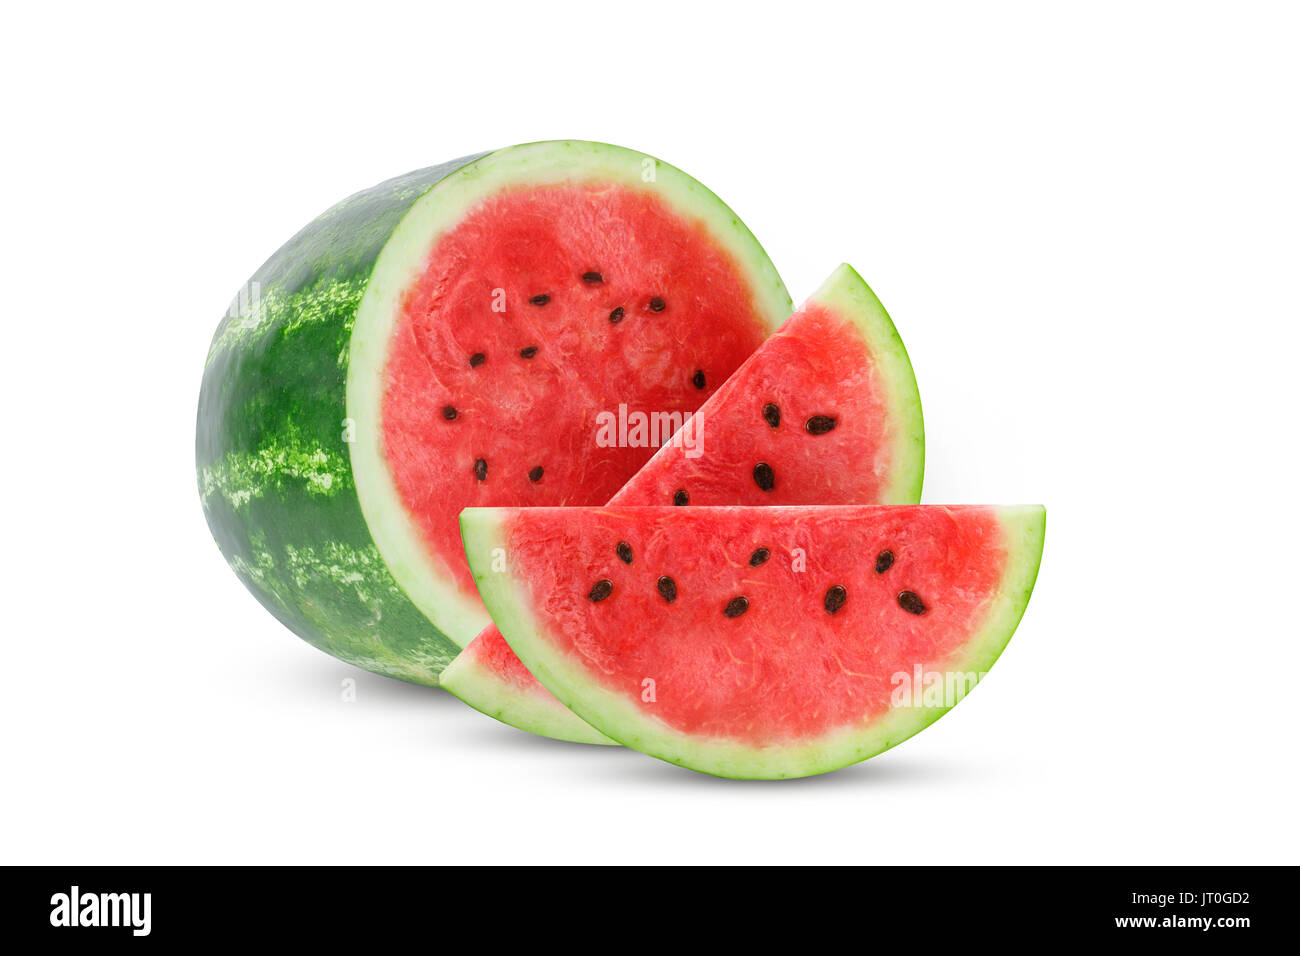 Cut in half fresh watermelon and slices of watermelon isolated on white background. Stock Photo